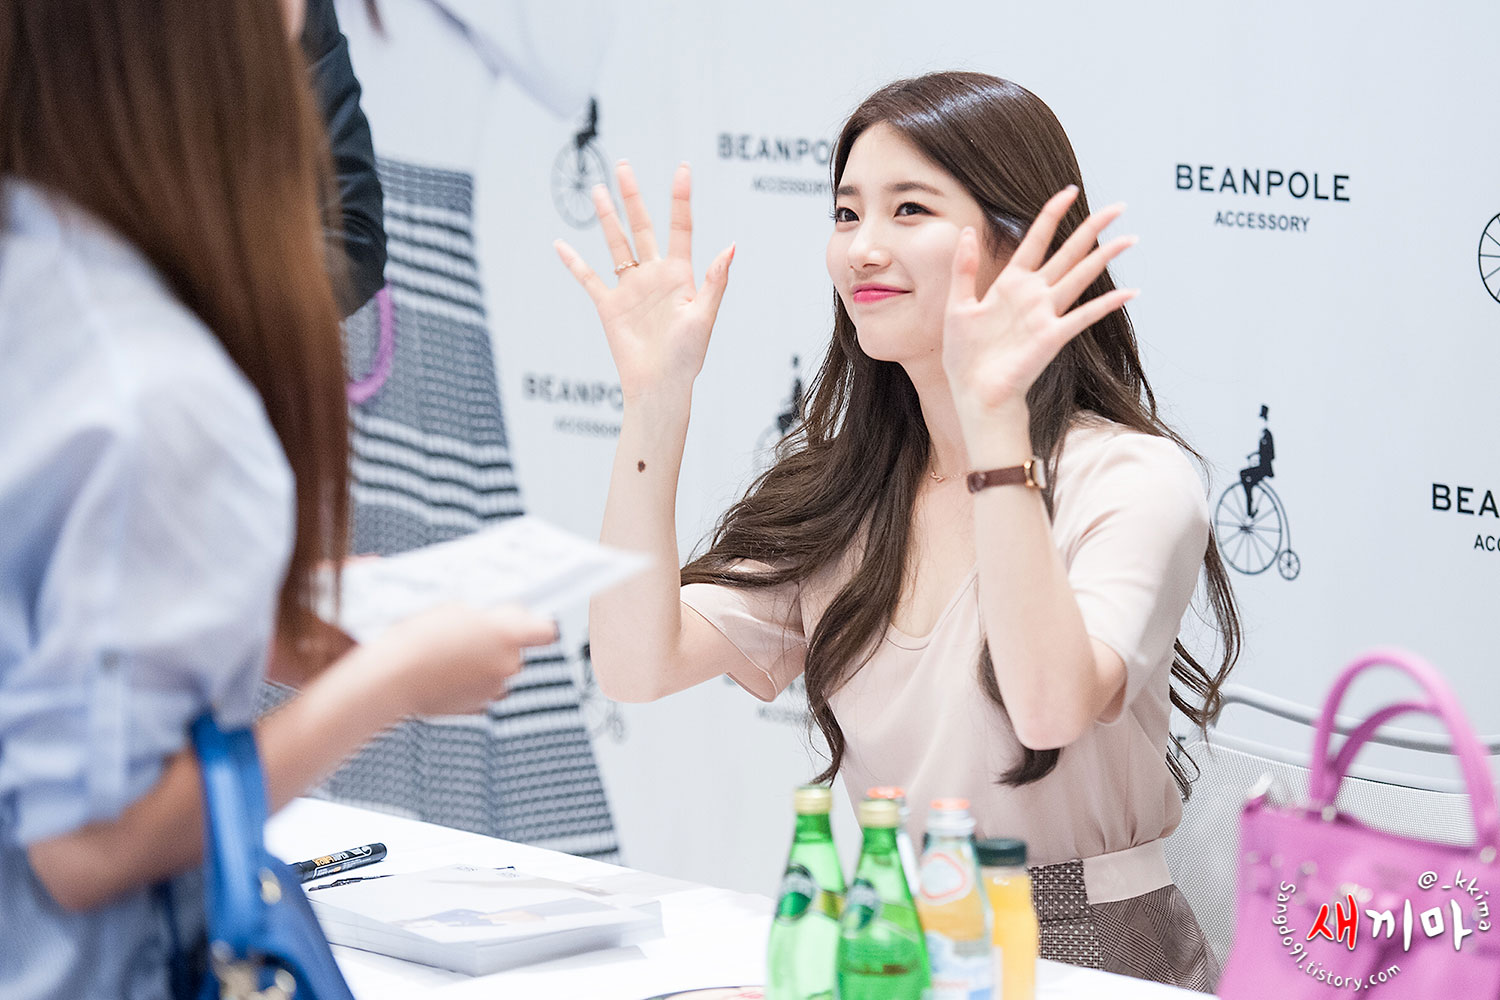 Miss A Suzy Bean Pole Busan fan signing event